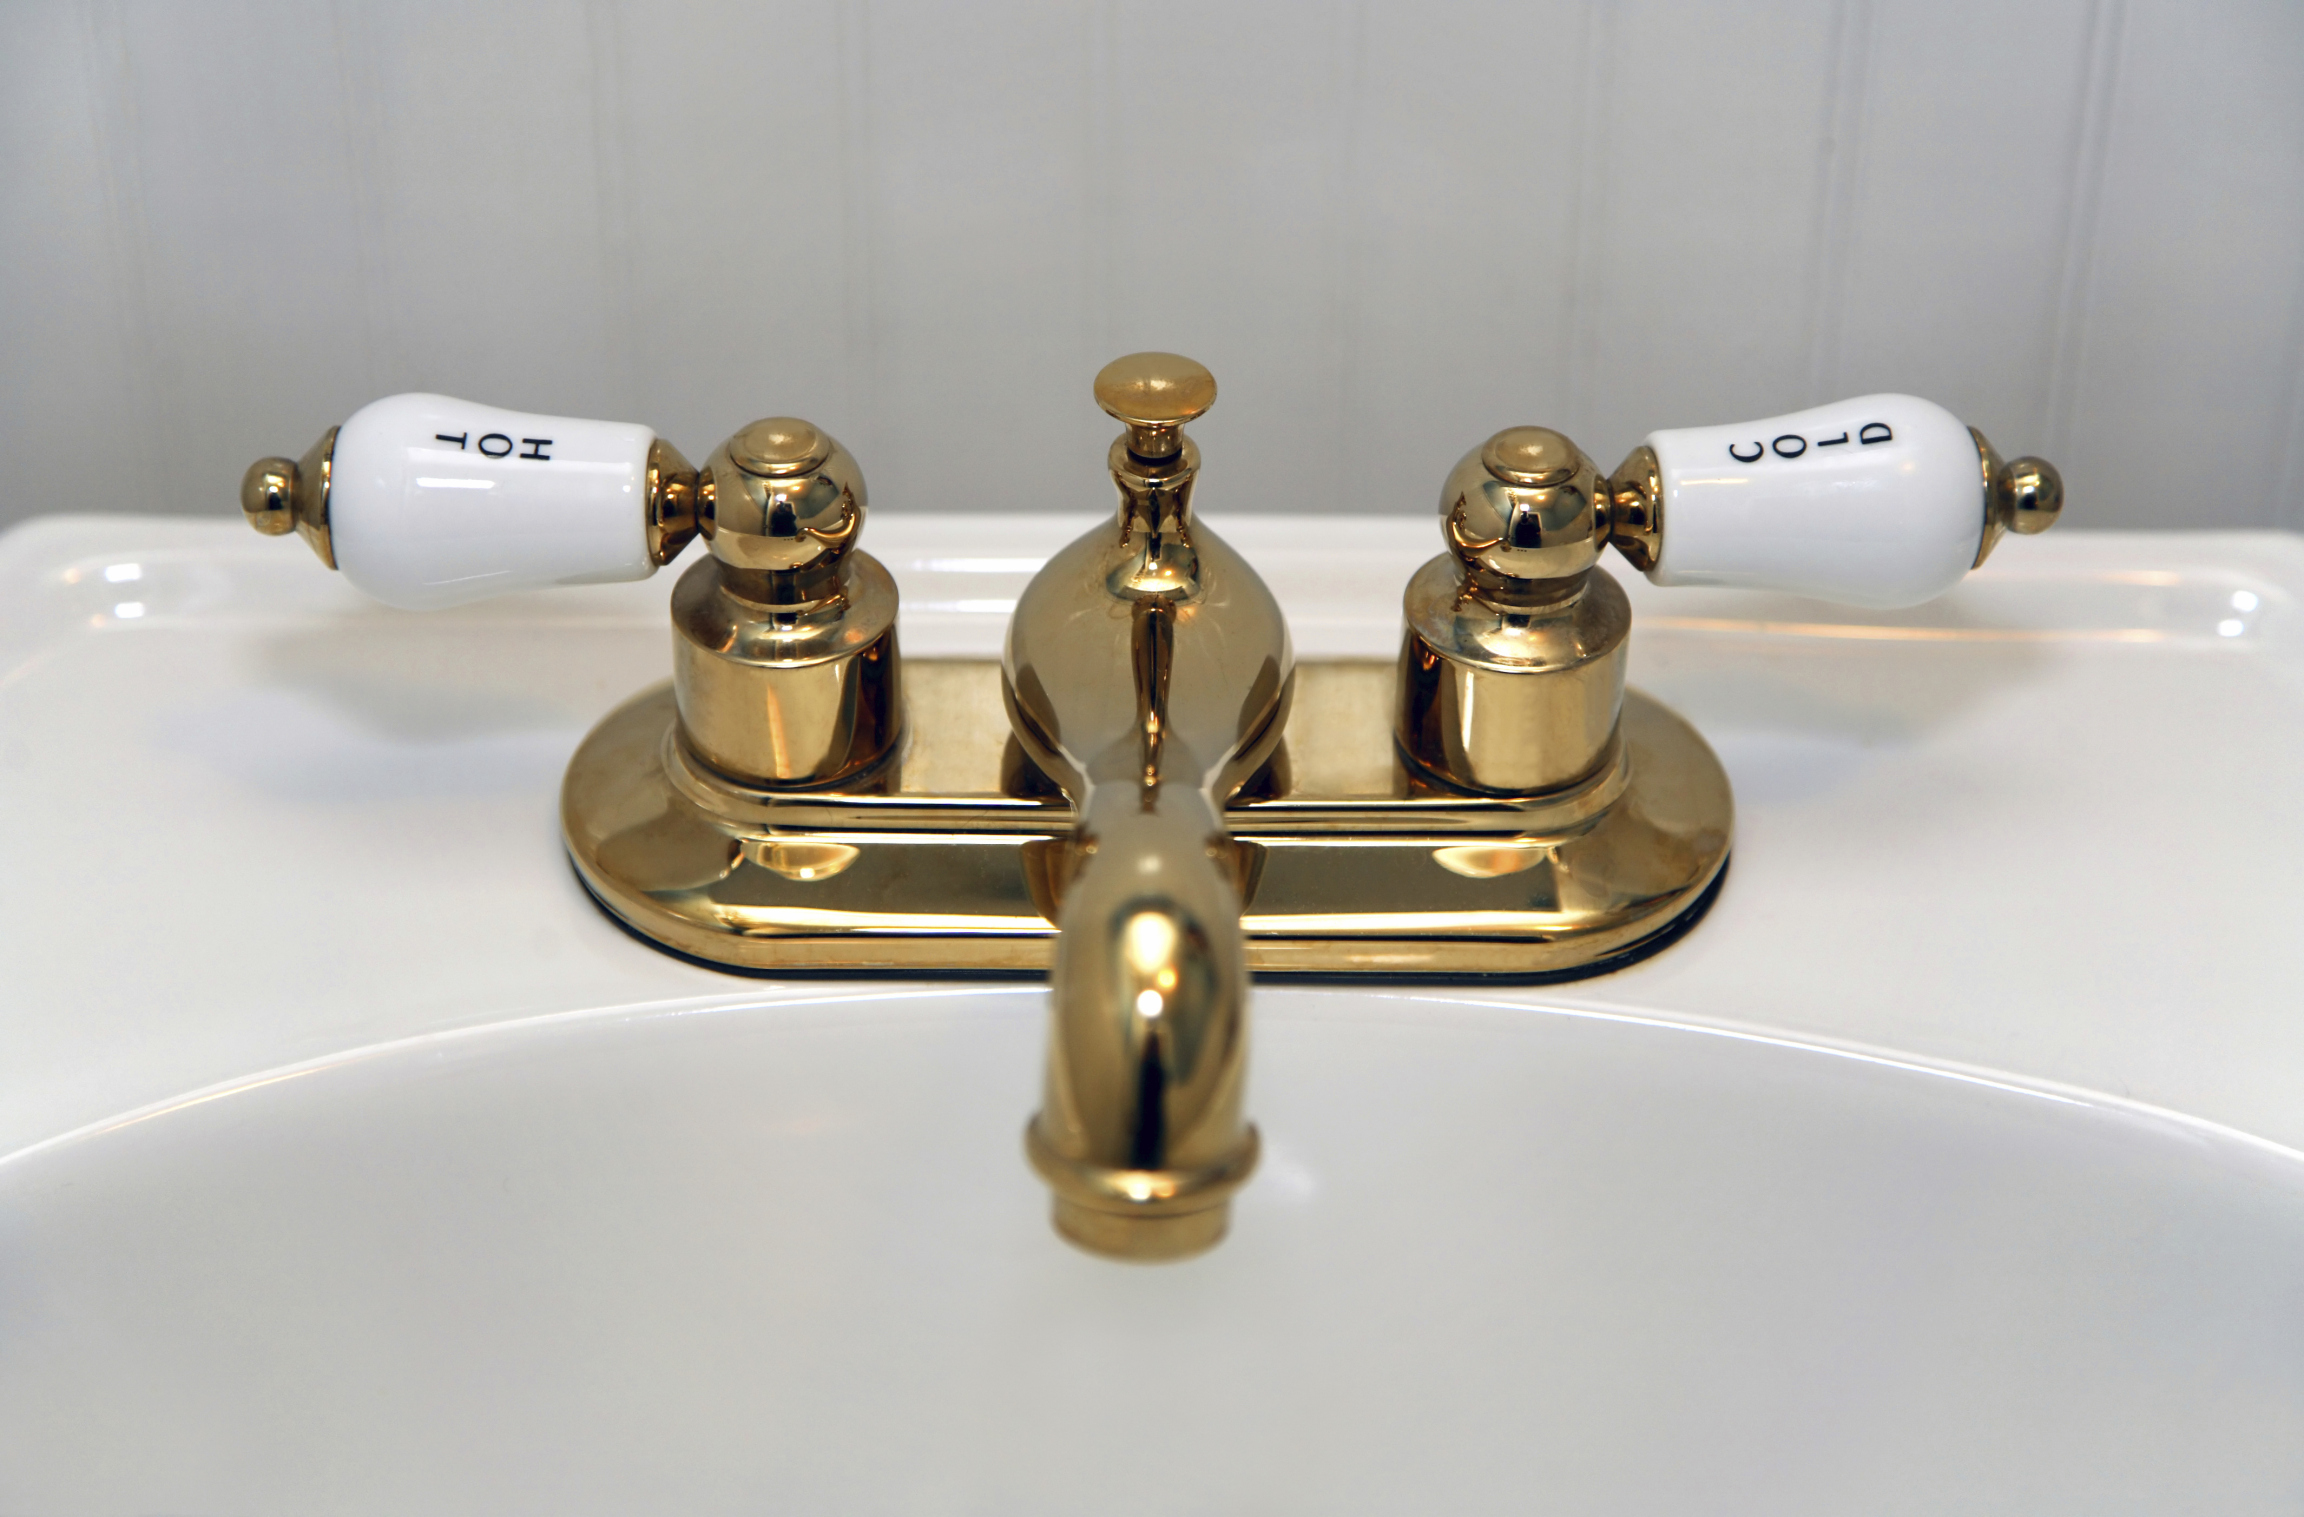 How To Properly Clean Brass At Home